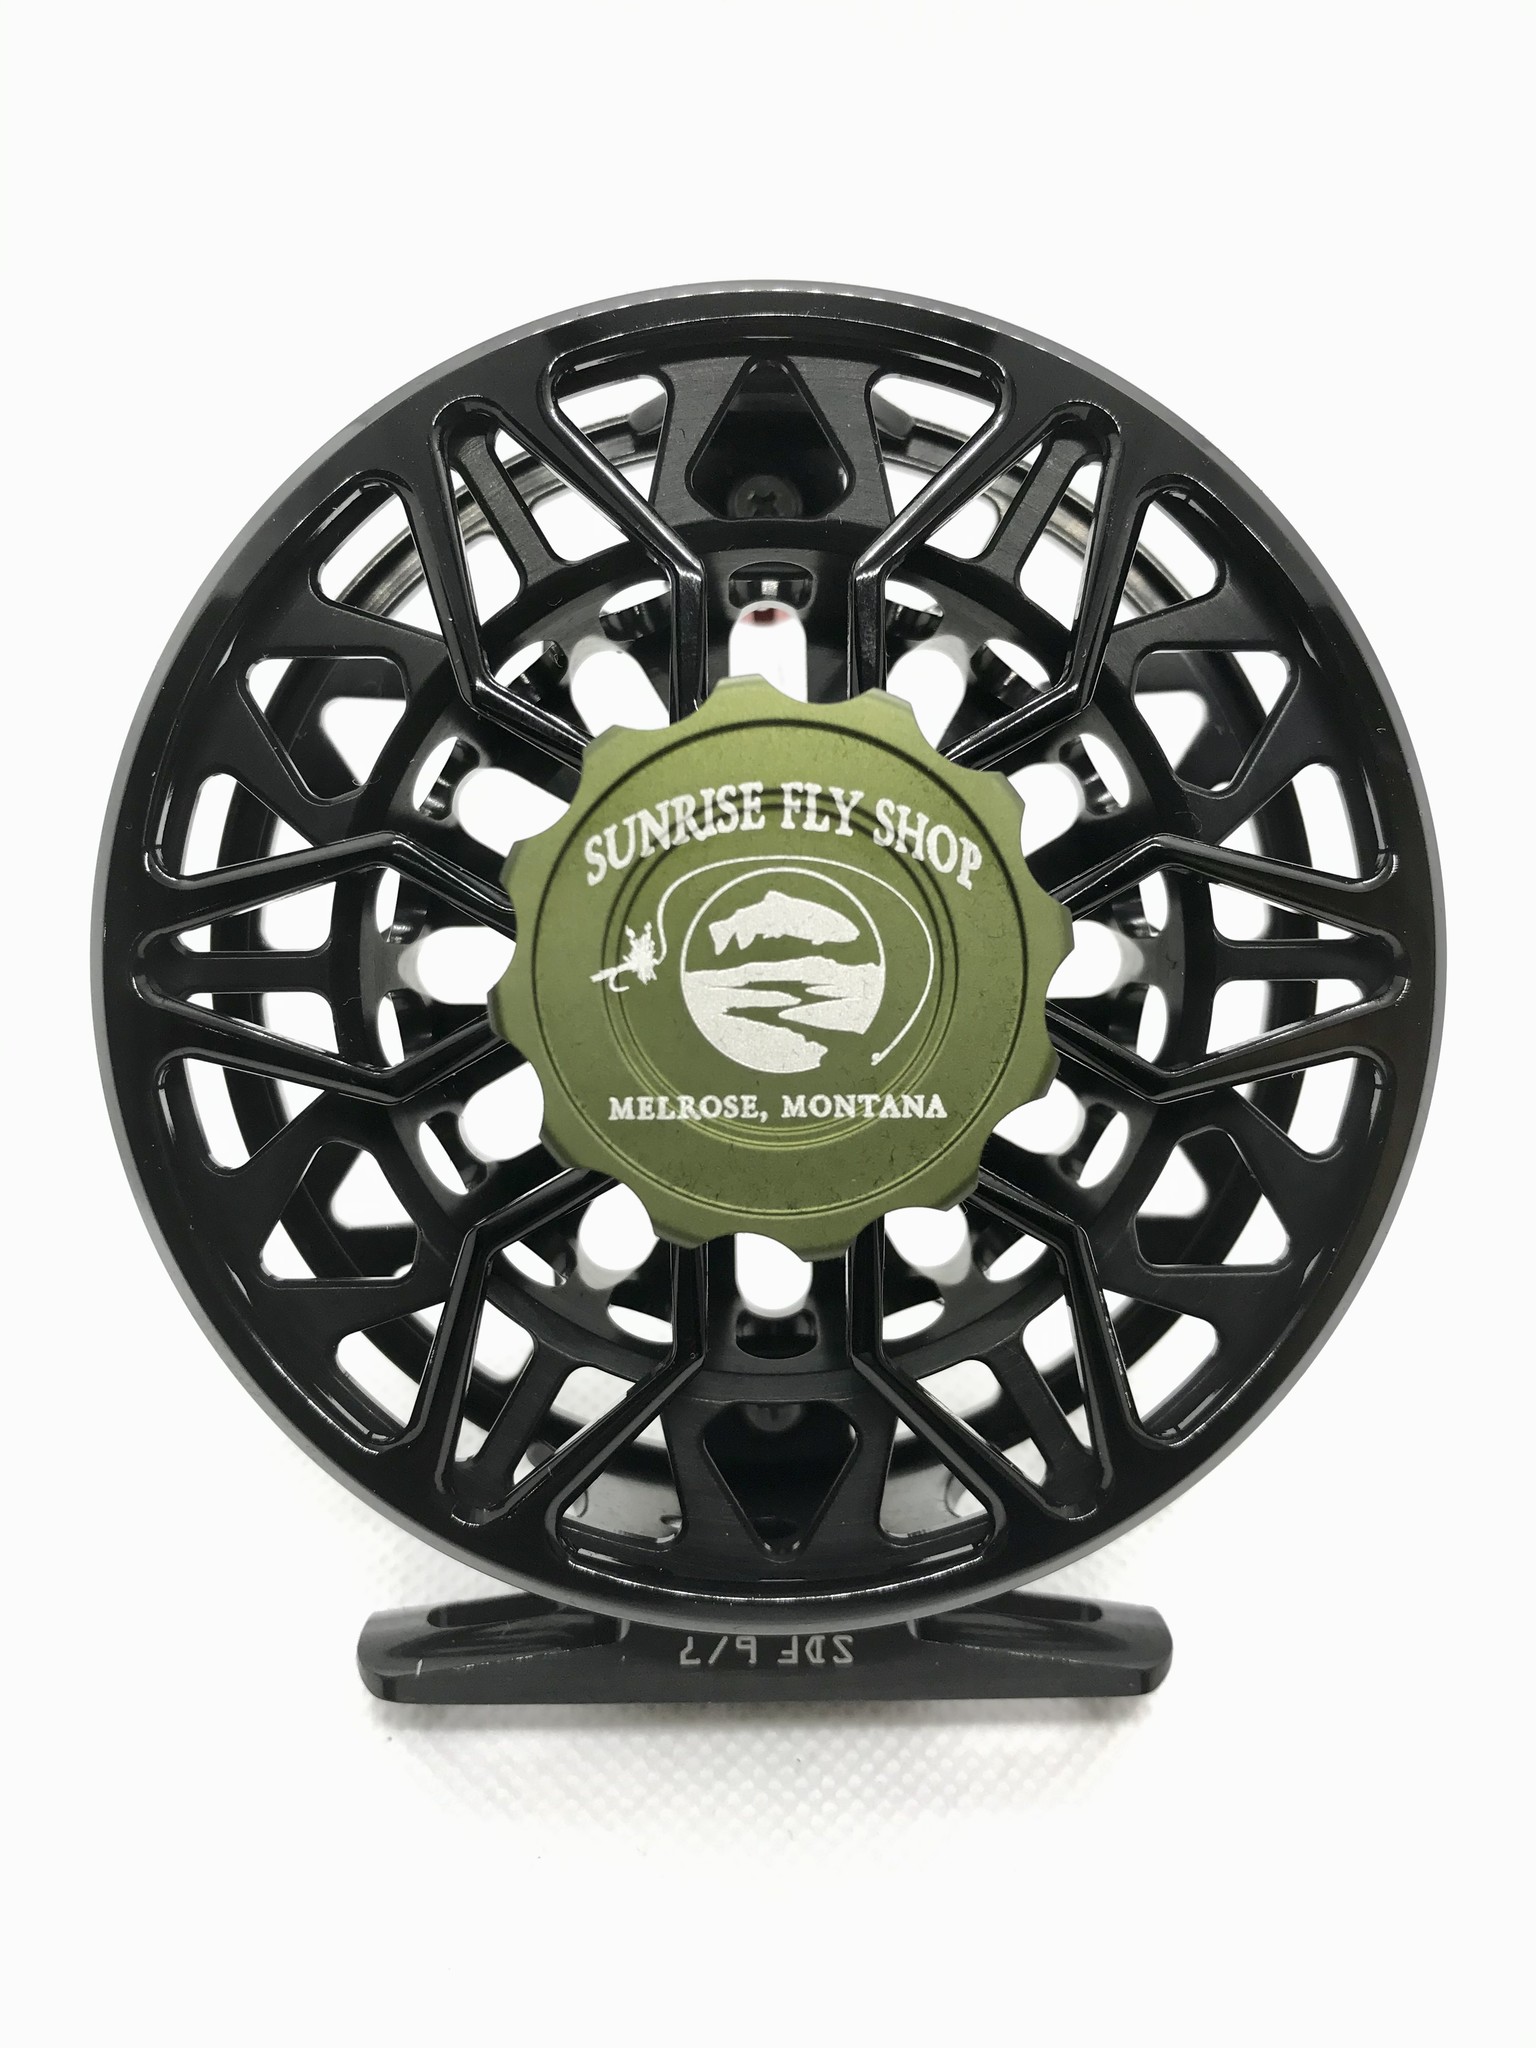 Abel SDF fly reel with custom finish